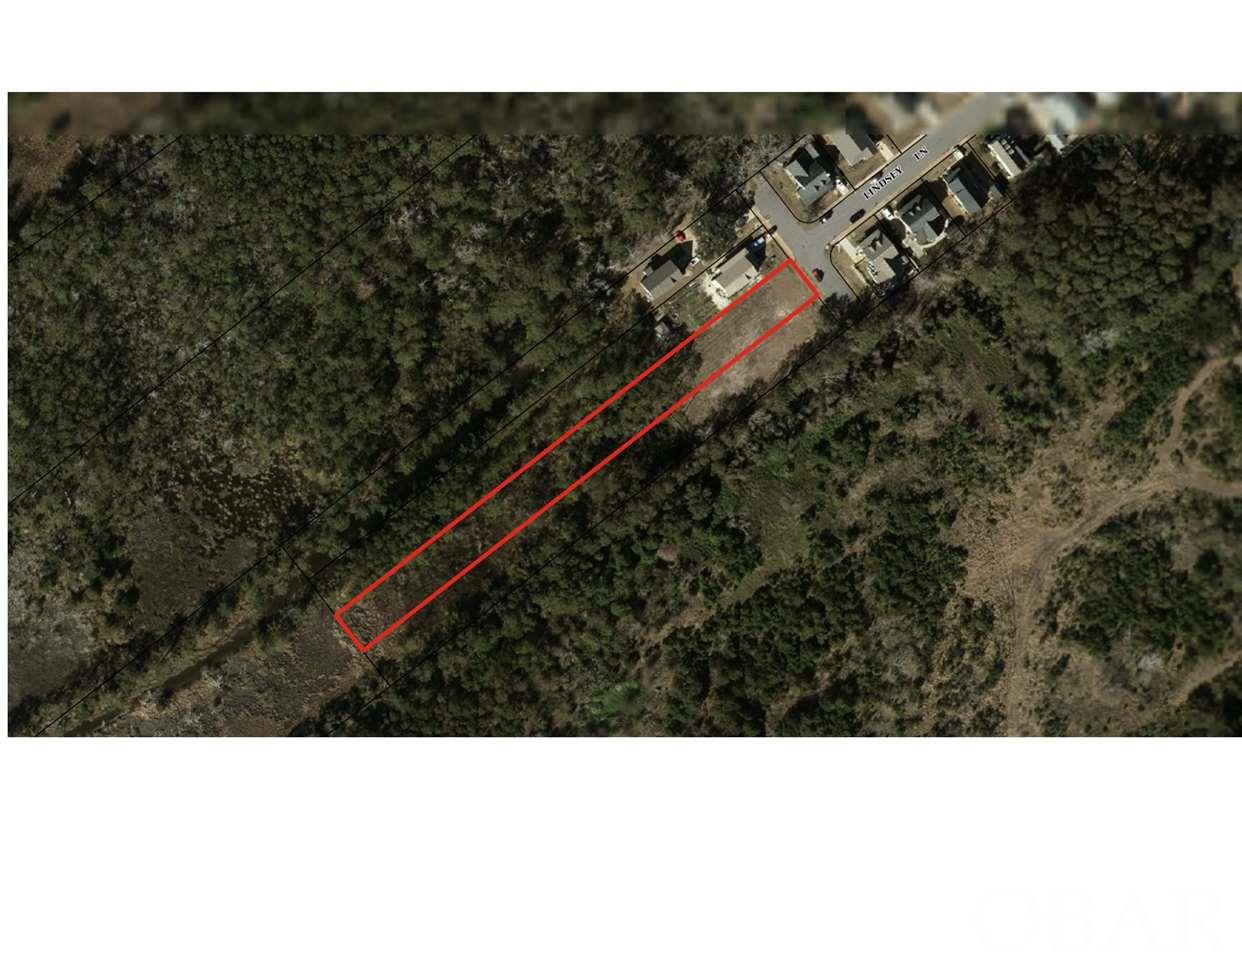 Cedar Bay is a part of historic Manteo's nicest new subdivision. This lot has incredible values. There will be Sound/marsh views from a reverse floor plan for sure. Grab this up for a land bank or let us build you a nice coastal getaway.